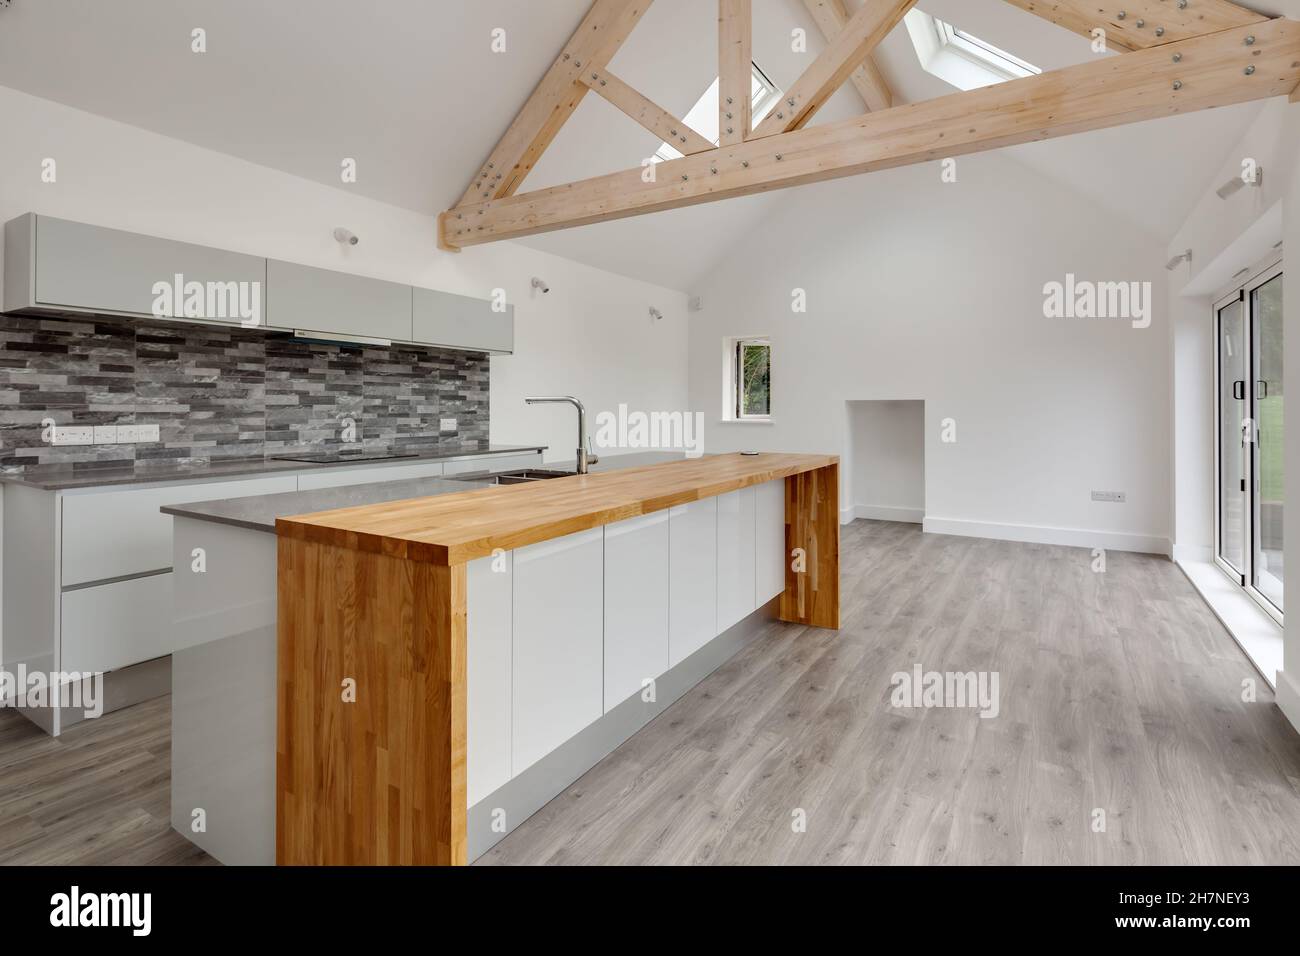 Lolworth, Cambridgeshire - July 30 2019: Brand new unoccupied home kitchen with vaulted ceiling and island peninsula unit Stock Photo